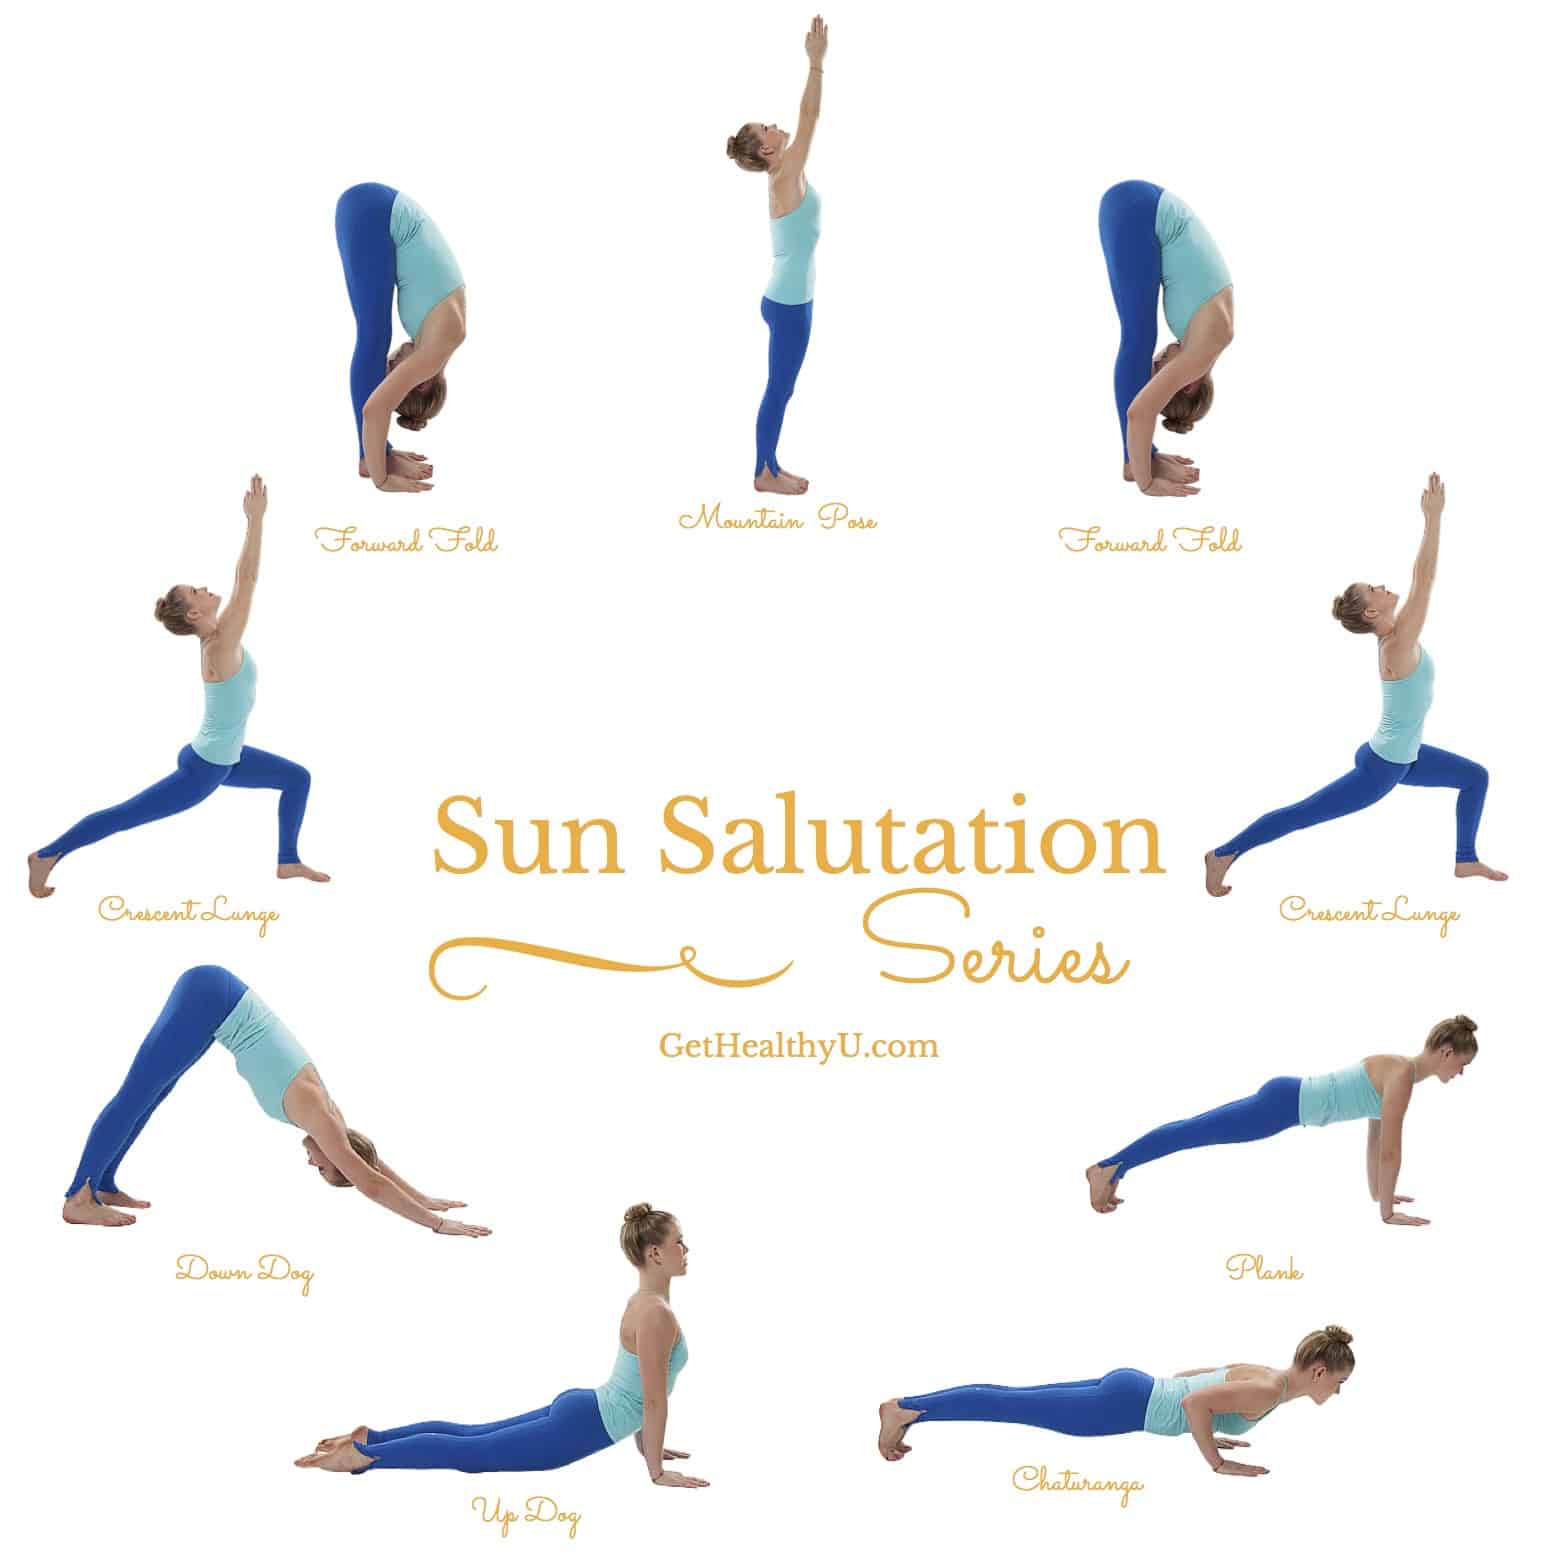 Lear how to do sun salutations to cultivate inner peace.